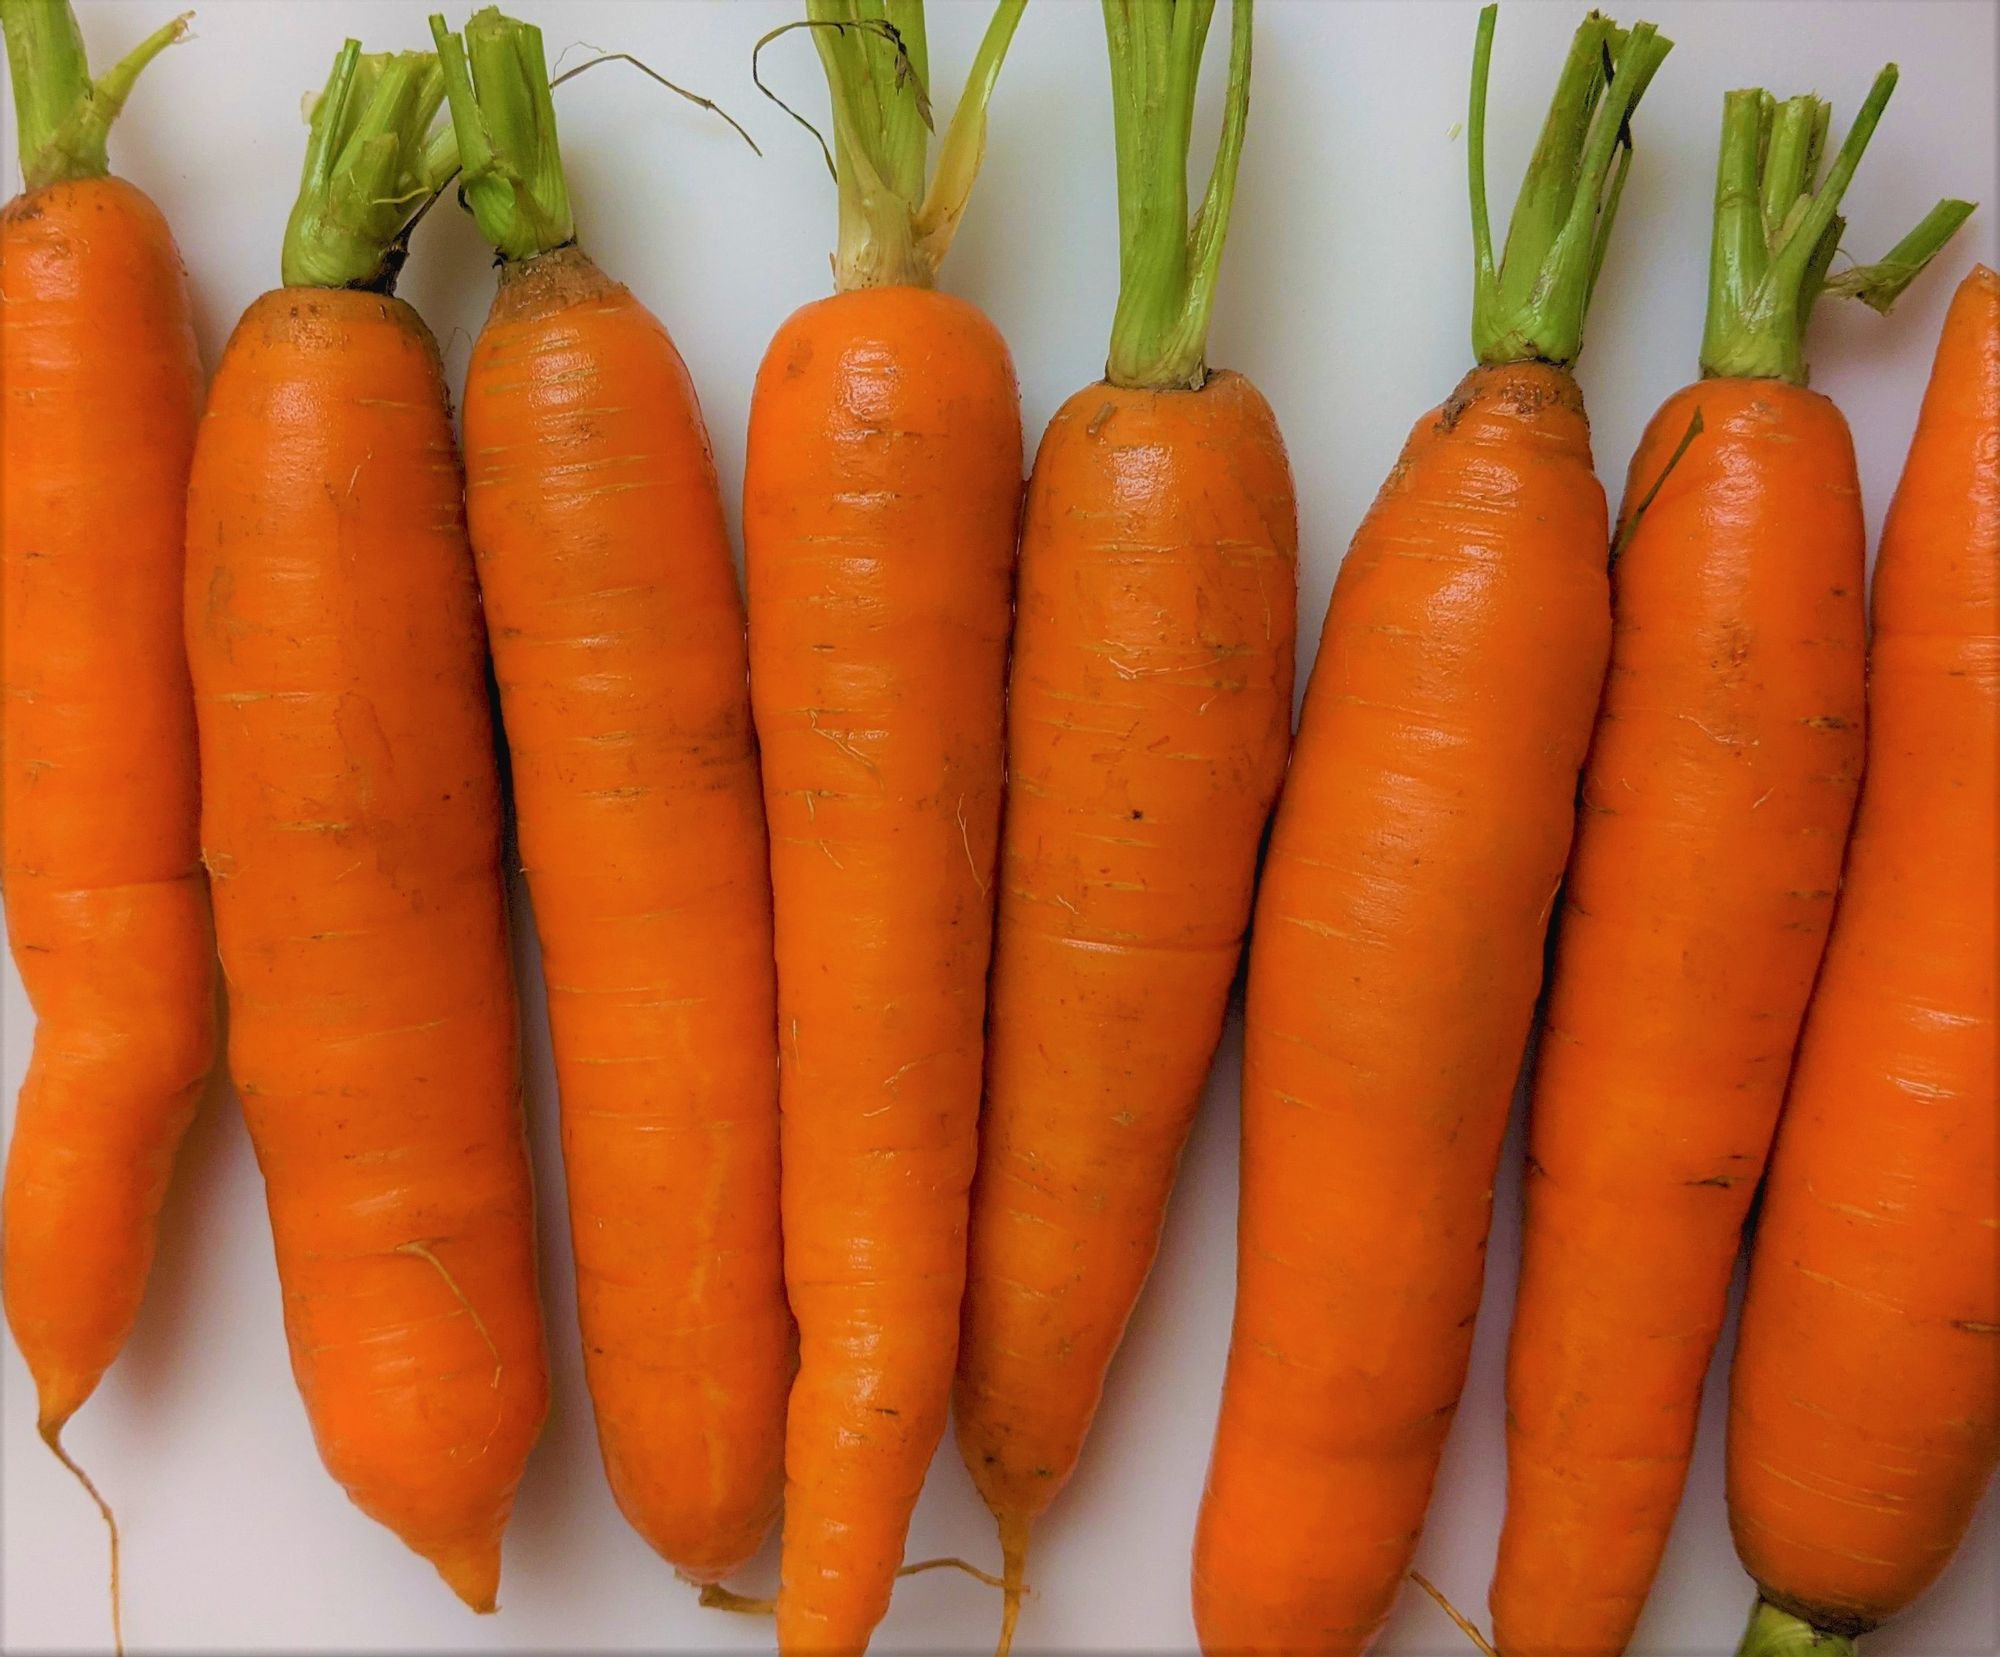 A row of well-washed carrots